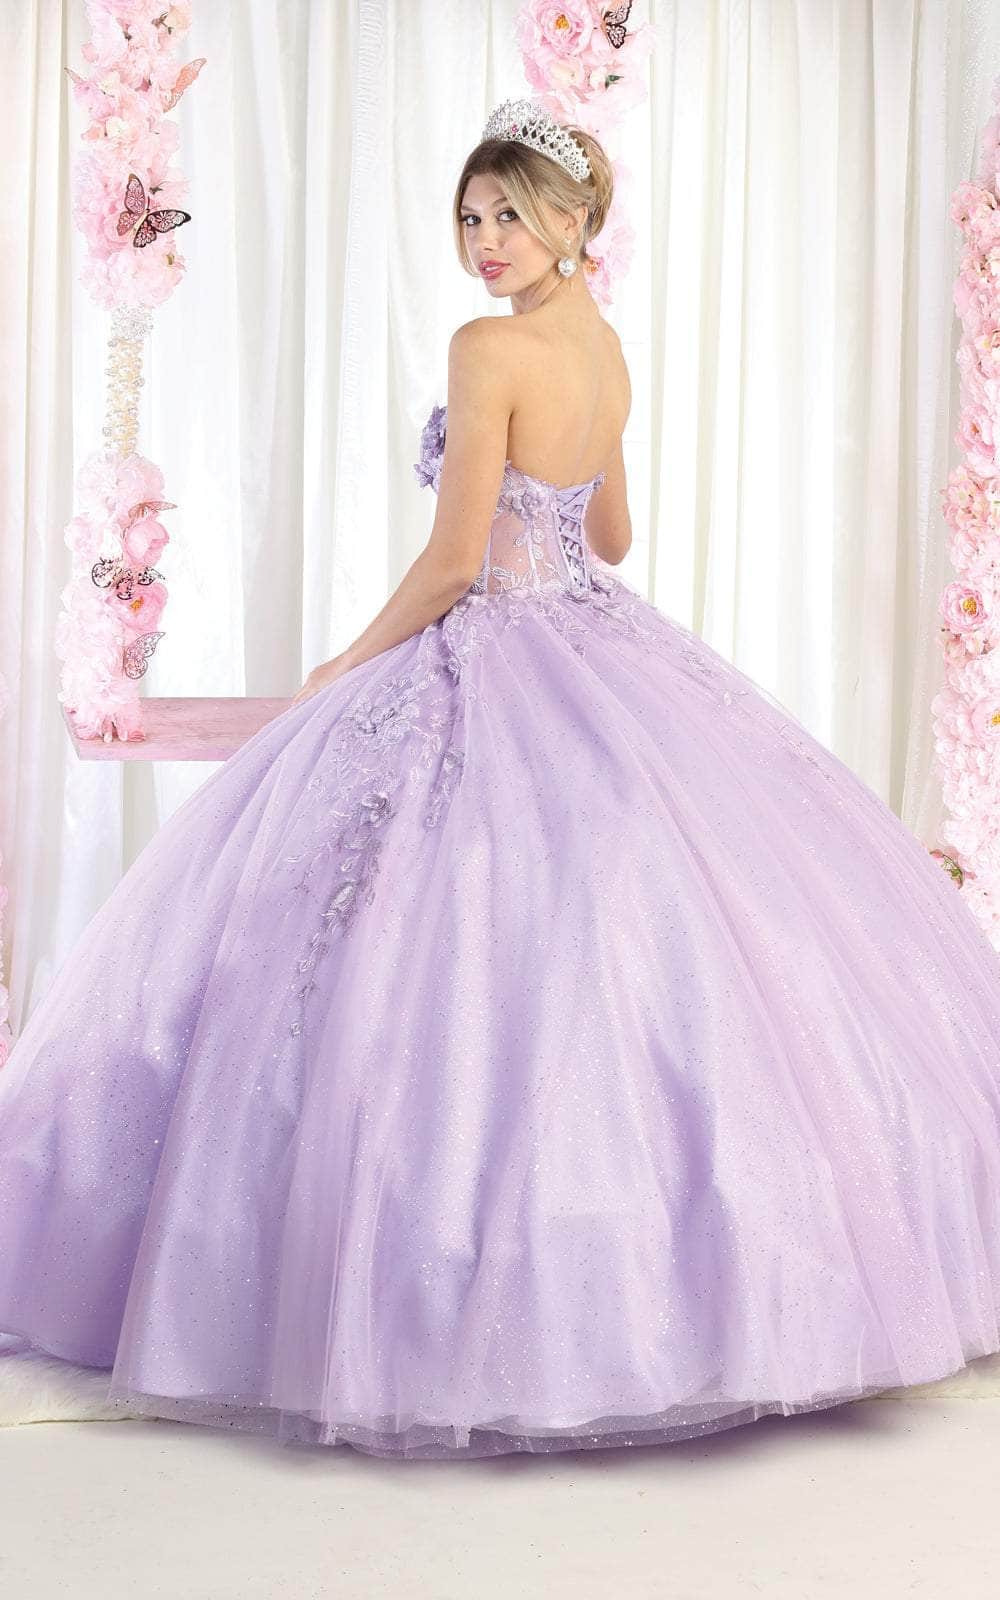 May Queen LK188 - Lace-Up Tie Corset Bodice Ballgown Ball Gowns 4 